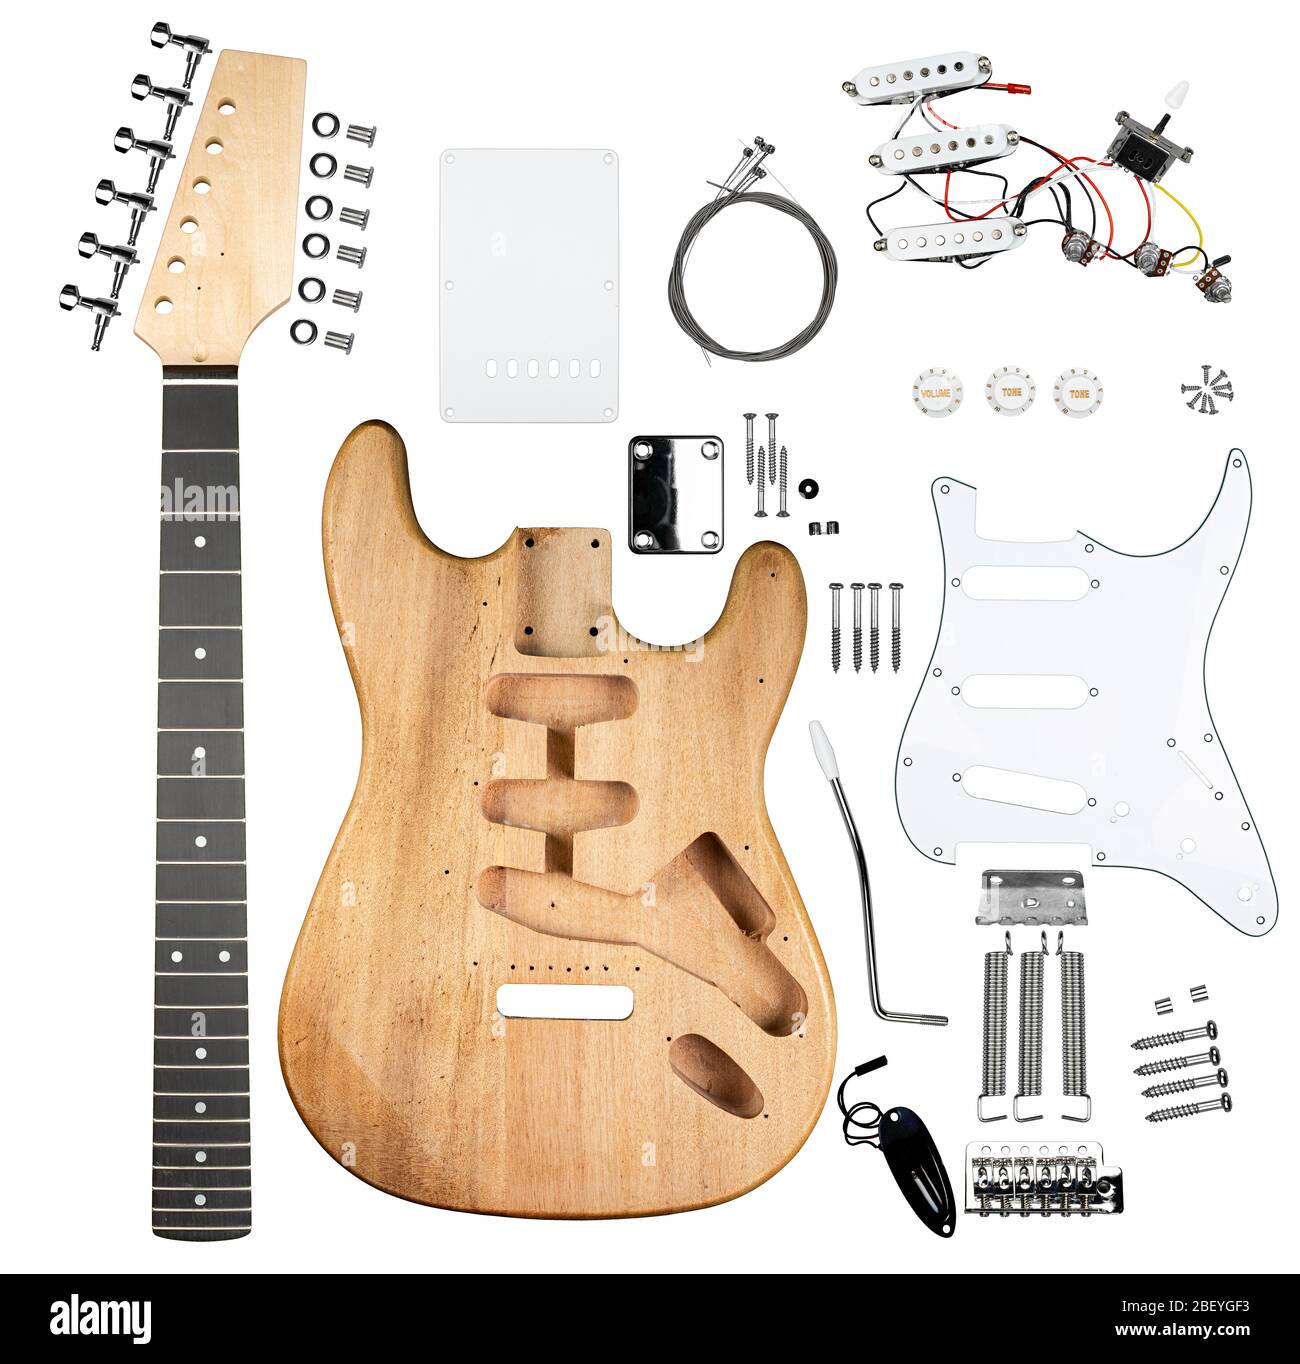 electric guitar diy building kit with all parts and components wooden body wood neck and electronics single coil pickguard pickup isolated on white ba Stock Photo